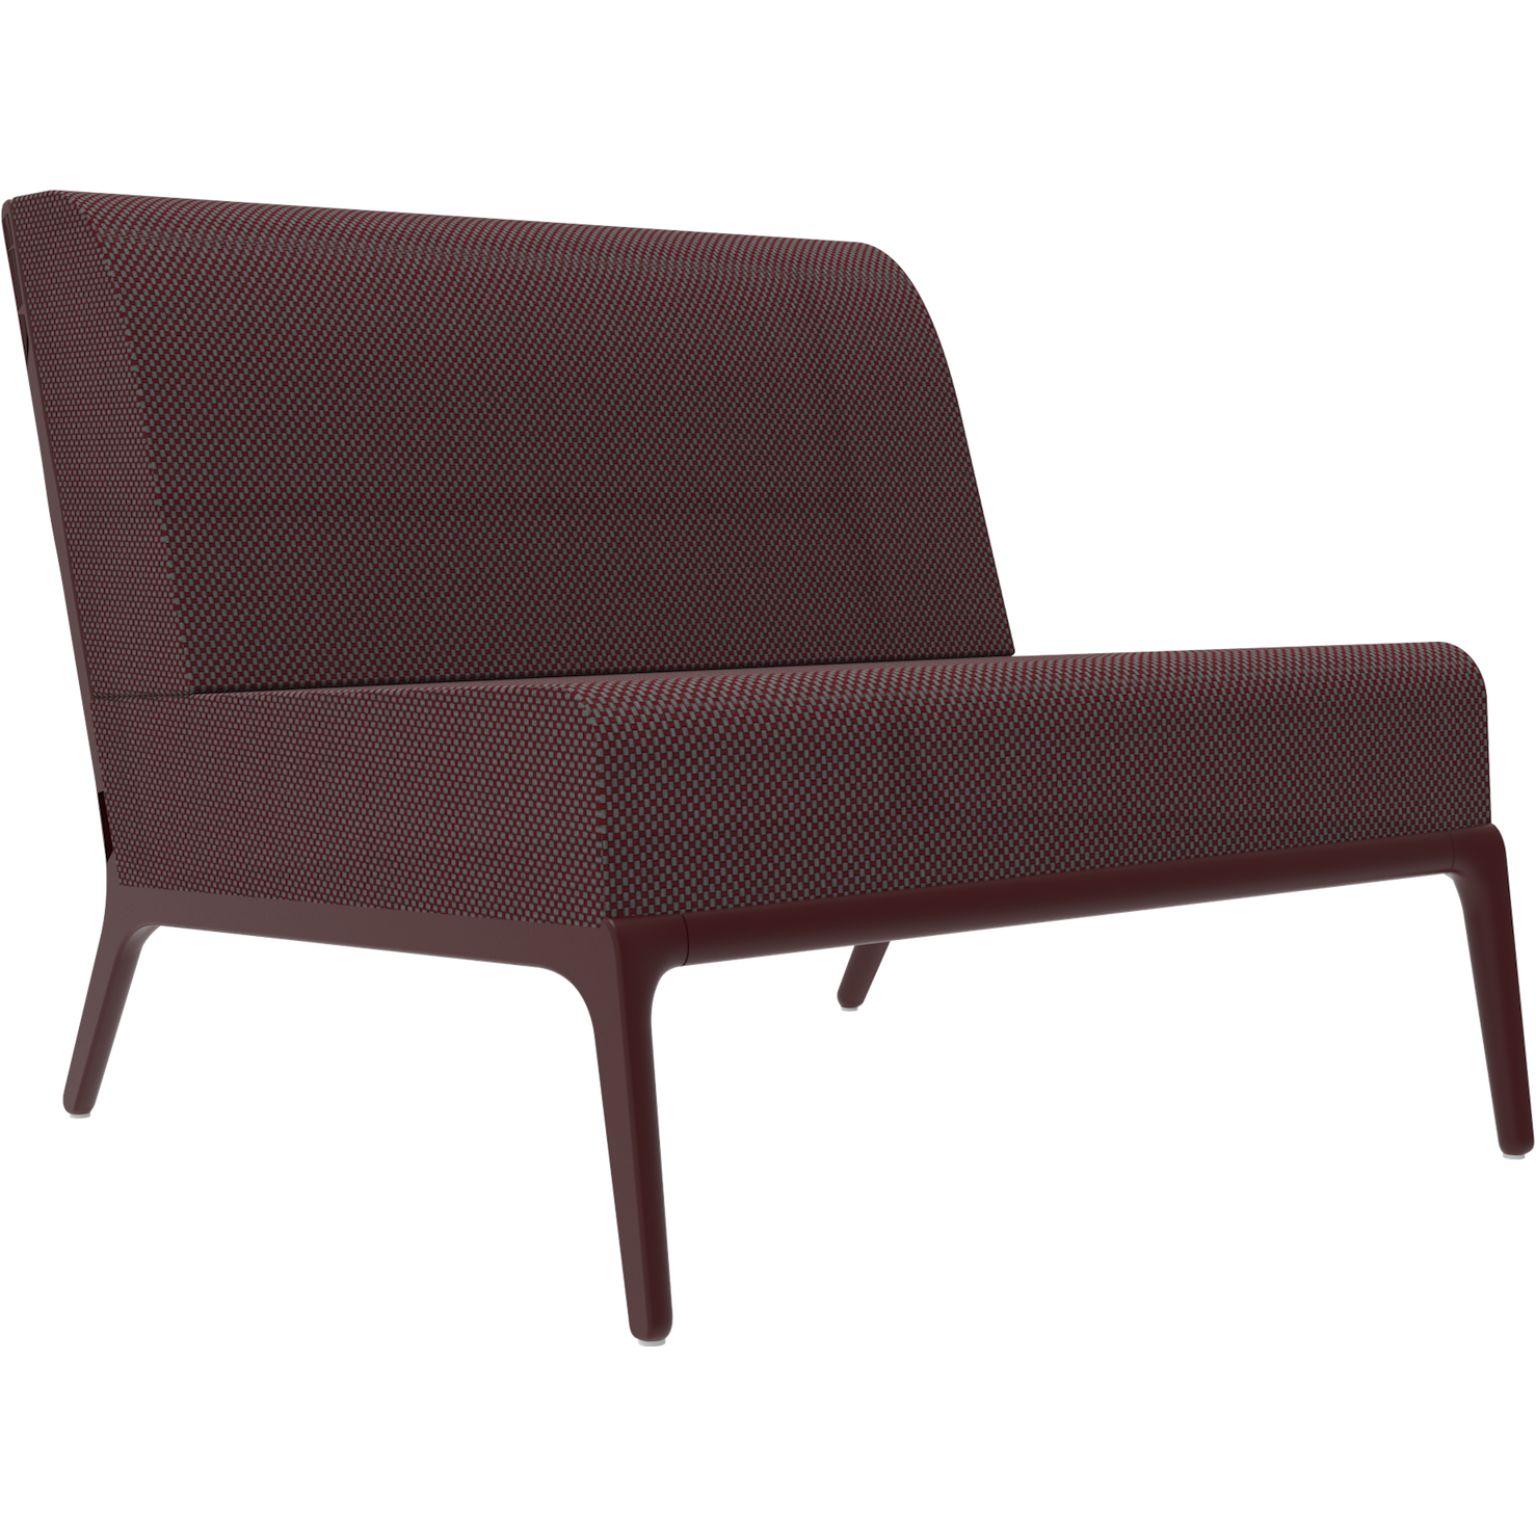 Xaloc central 90 burgundy modular sofa by MOWEE
Dimensions: D100 x W90 x H81 cm (Seat Height 42cm)
Material: Aluminium, Textile
Weight: 24 kg
Also Available in different colours and finishes. 

 Xaloc synthesizes the lines of interior